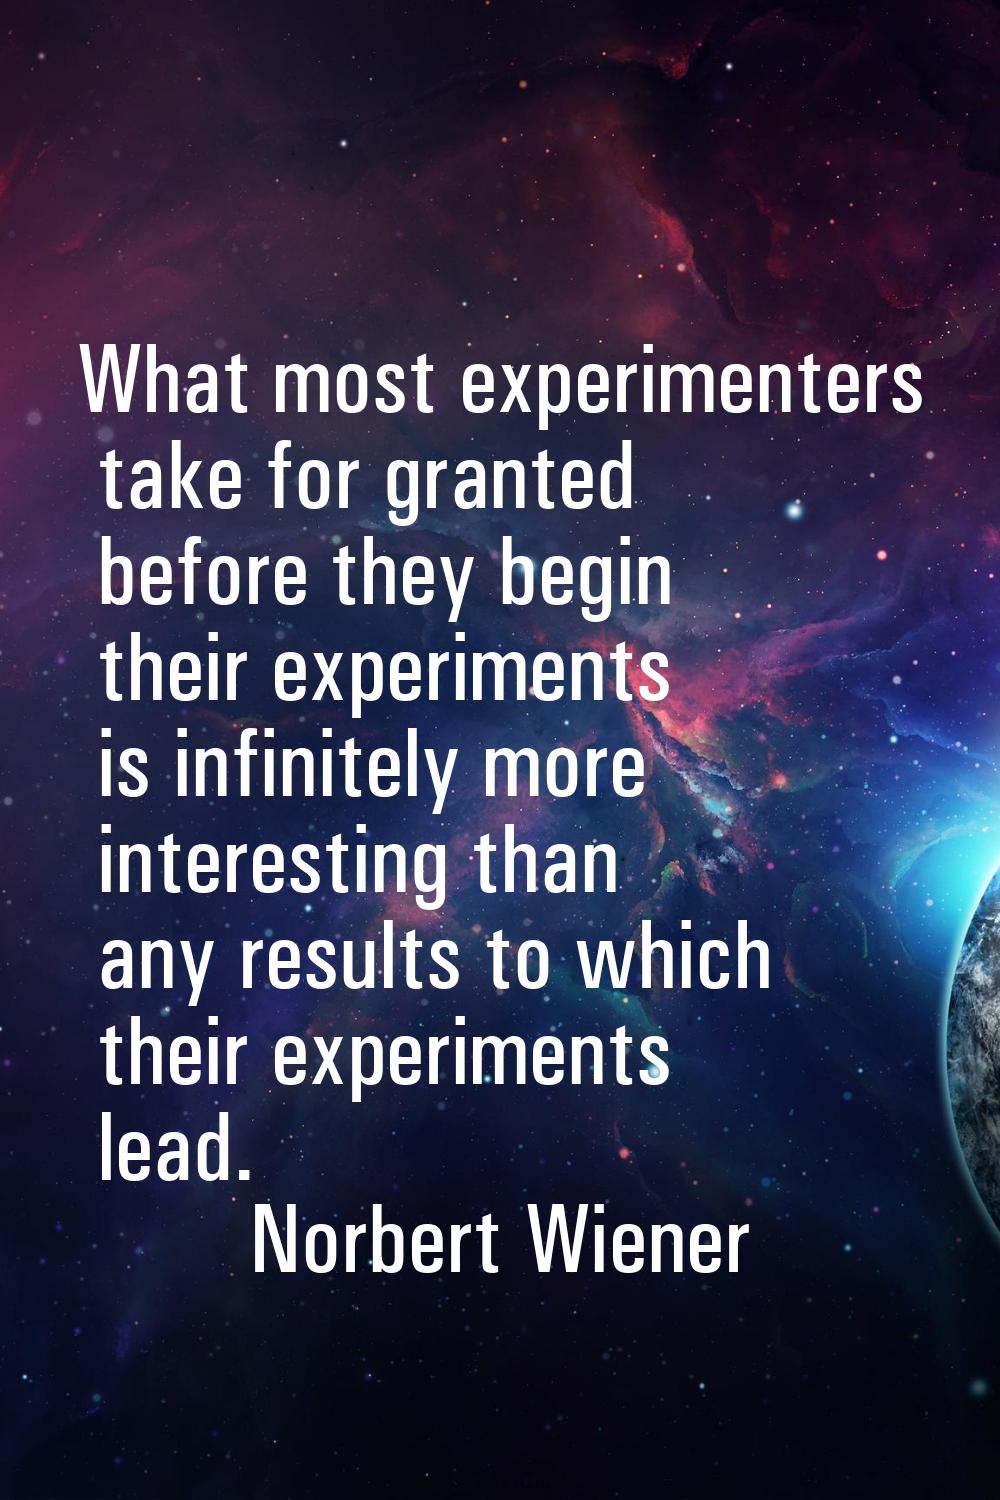 What most experimenters take for granted before they begin their experiments is infinitely more int